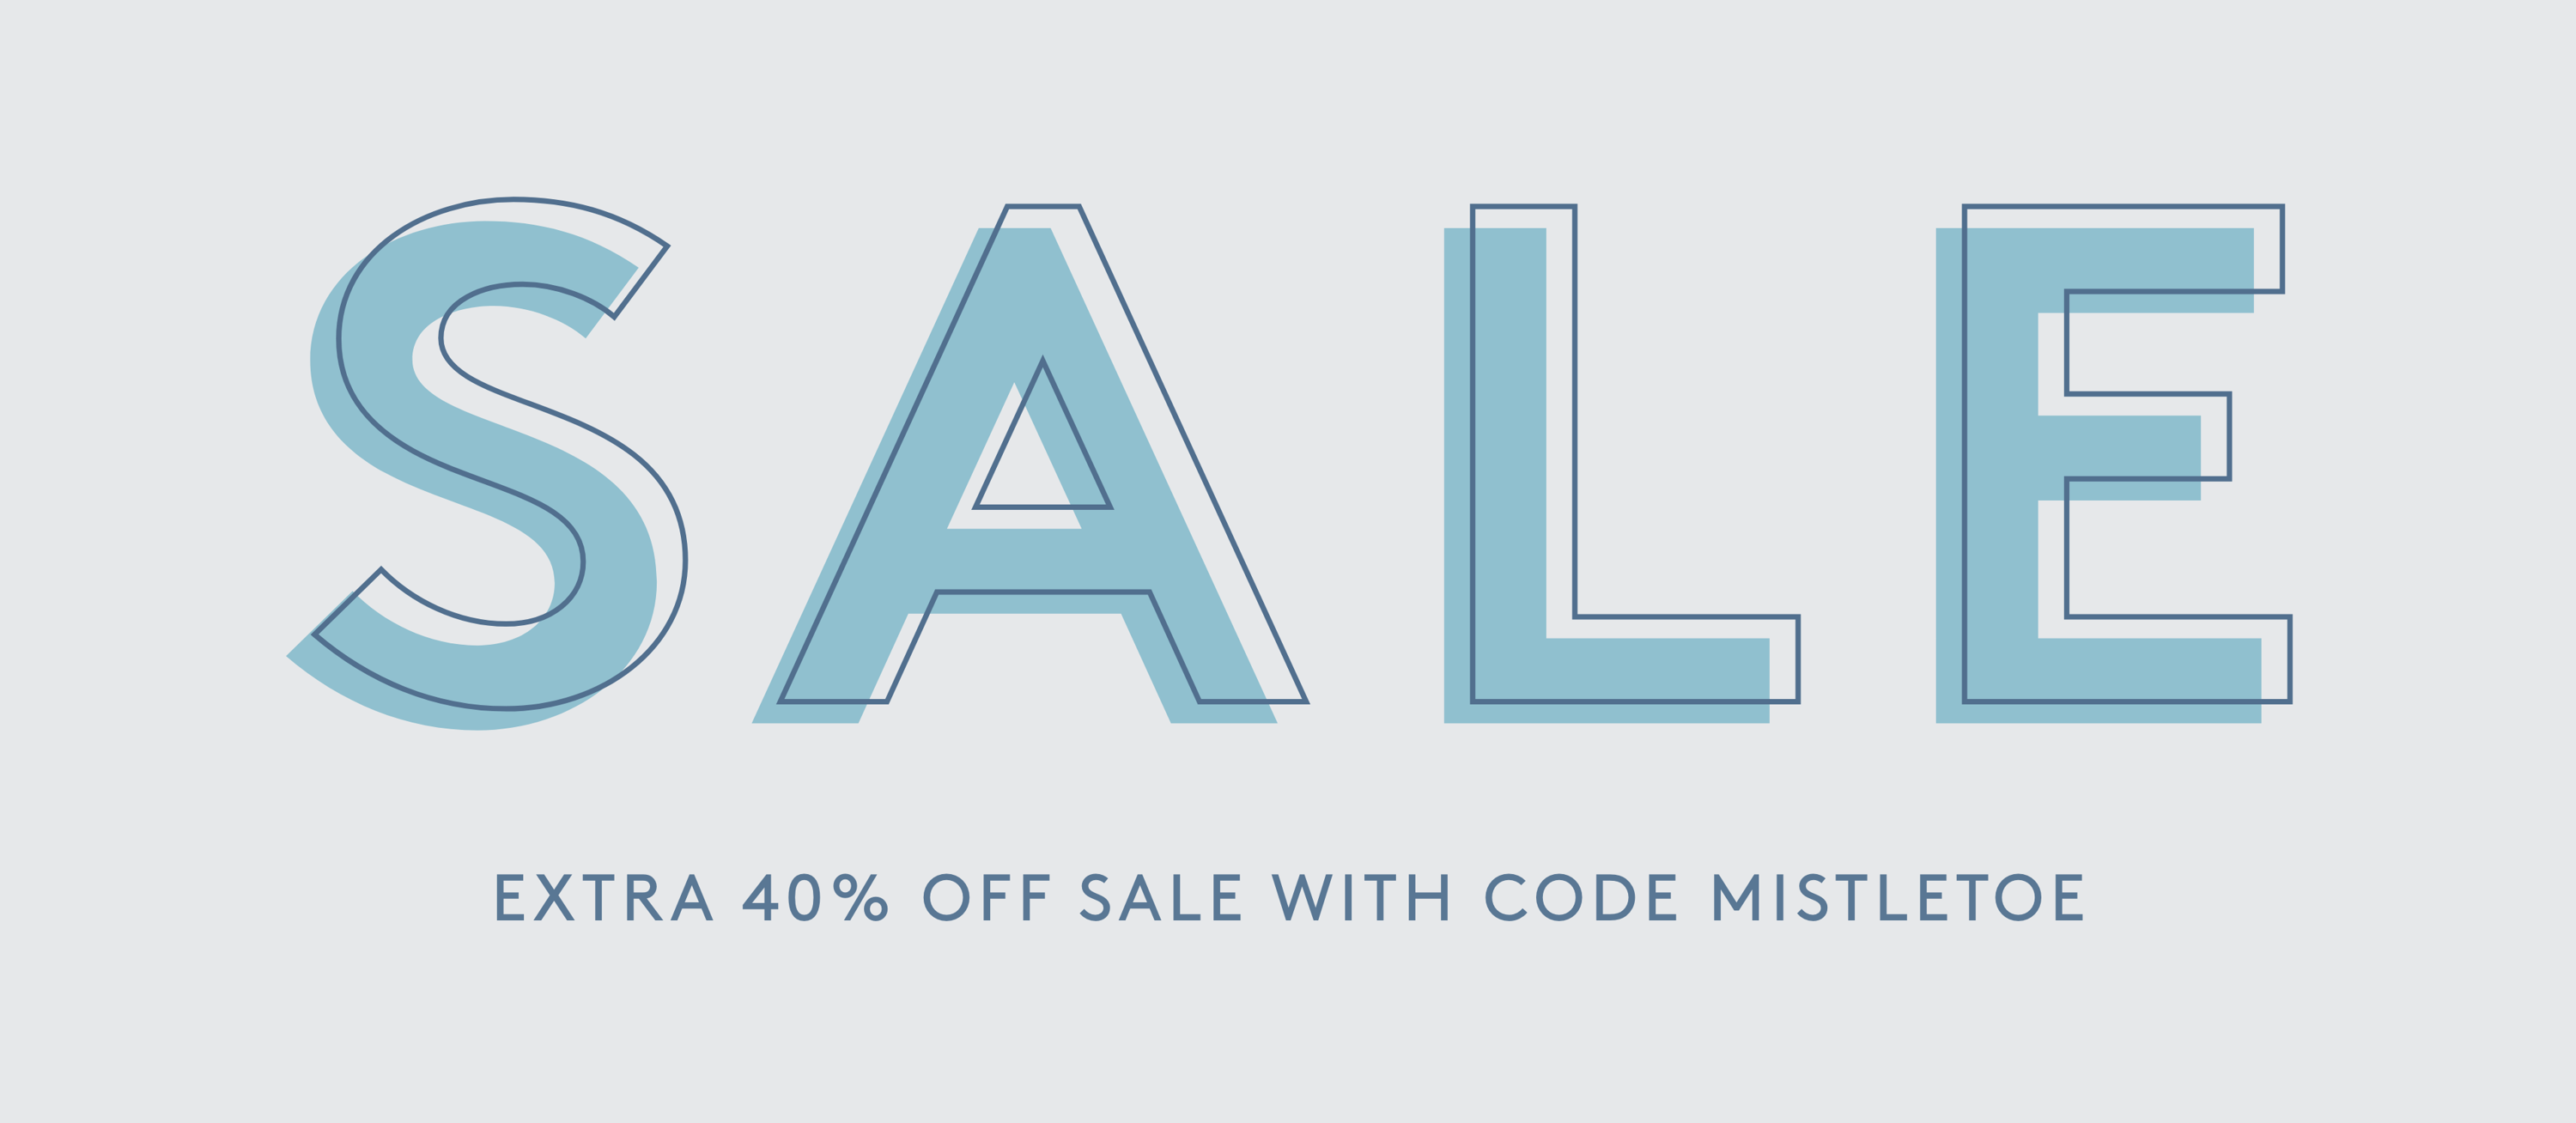 EXTRA 40% OFF SALE